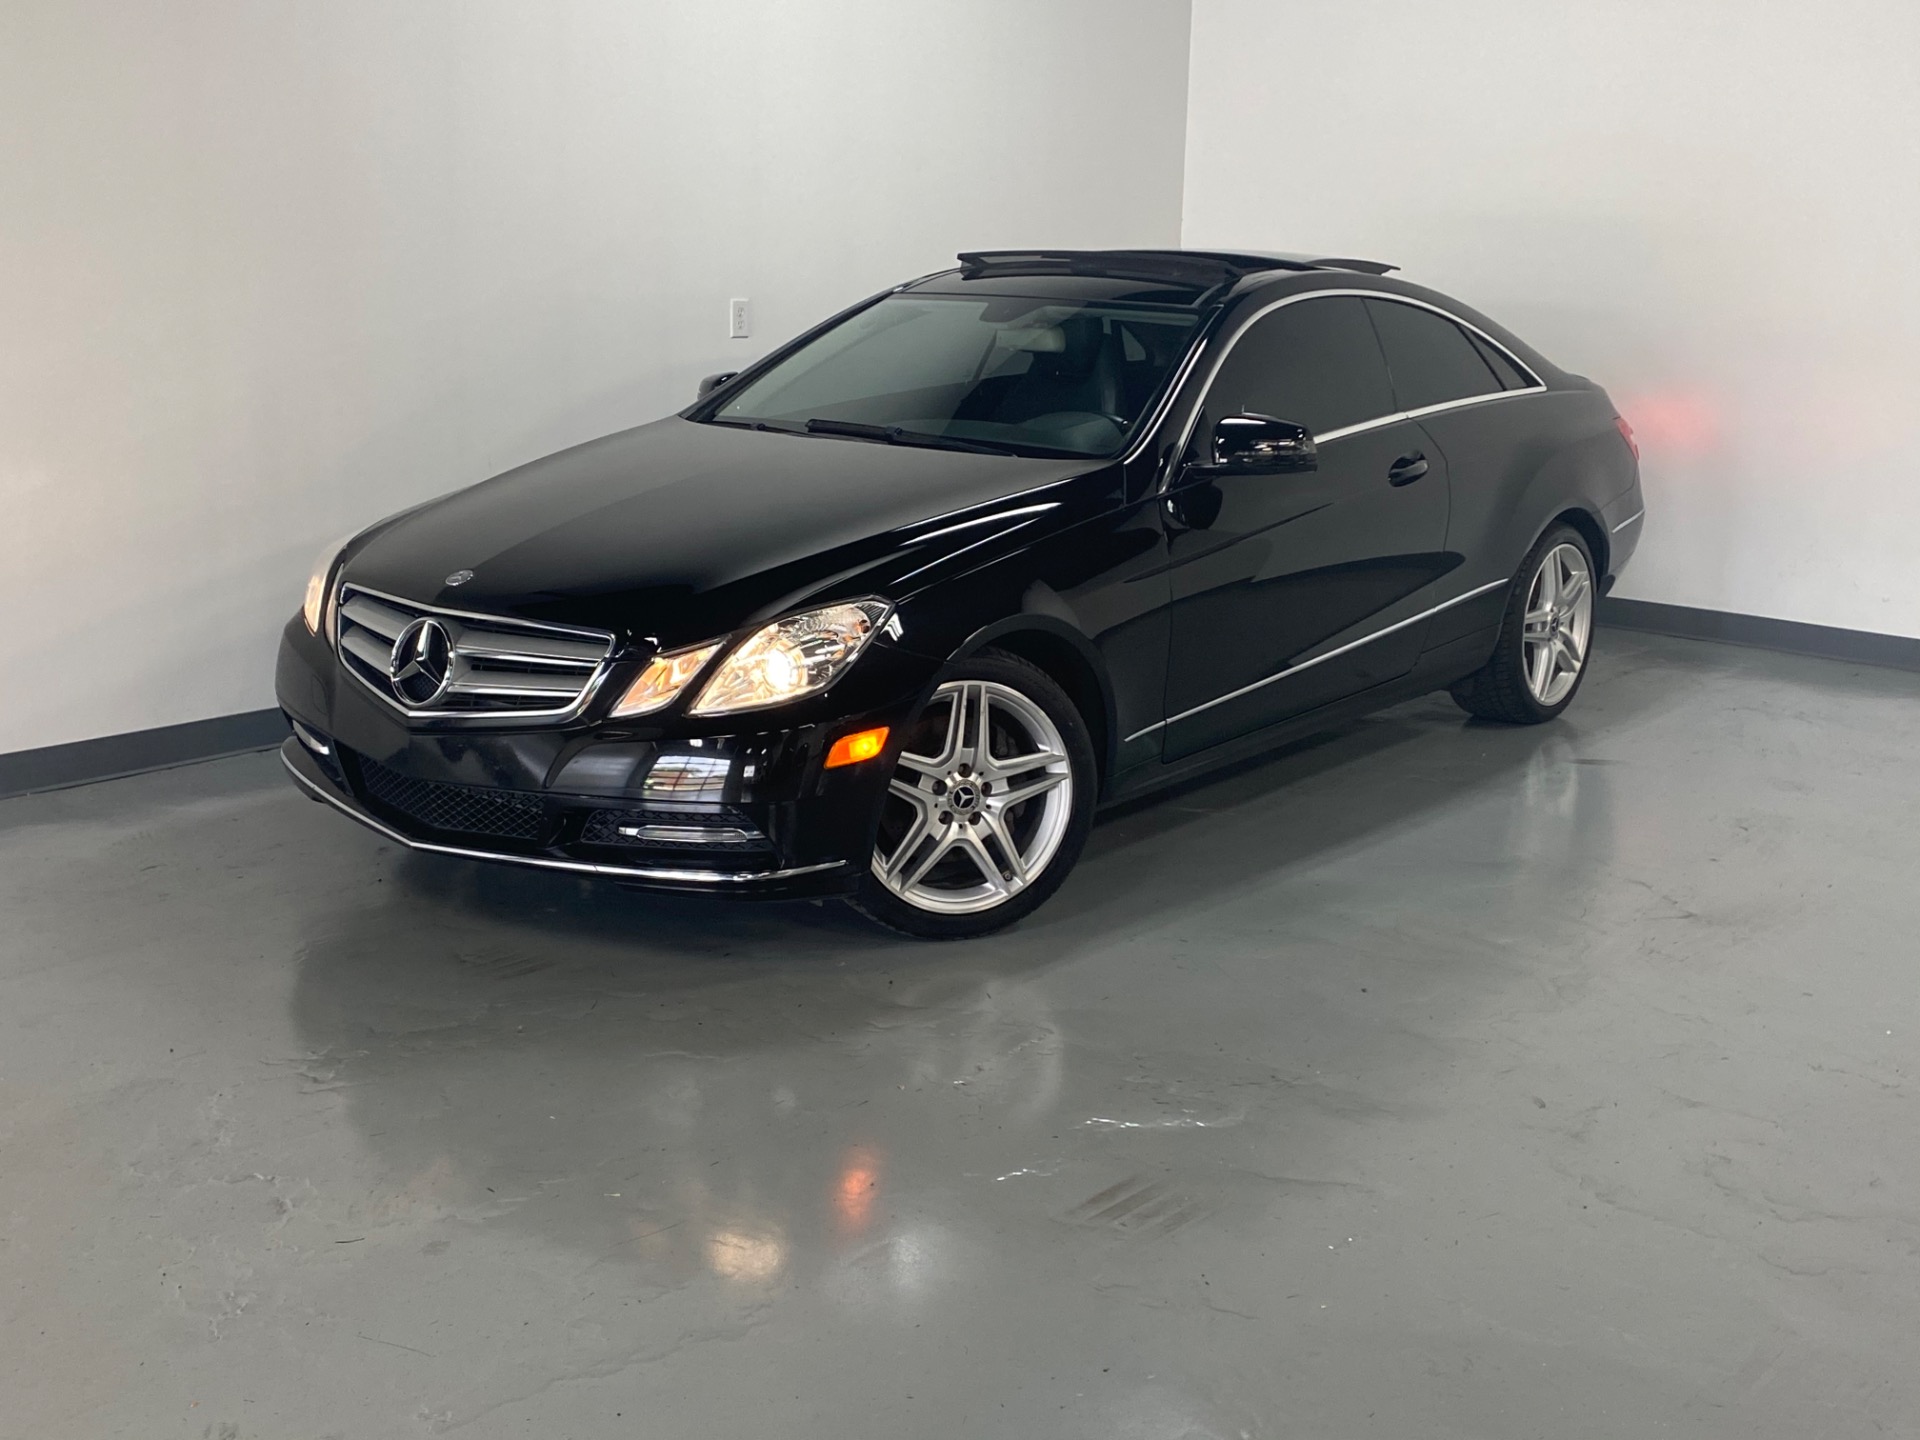 Used 13 Black Mercedes Benz E Class 50 Coupe Awd E 350 4matic For Sale Sold Prime Motorz Stock 2874